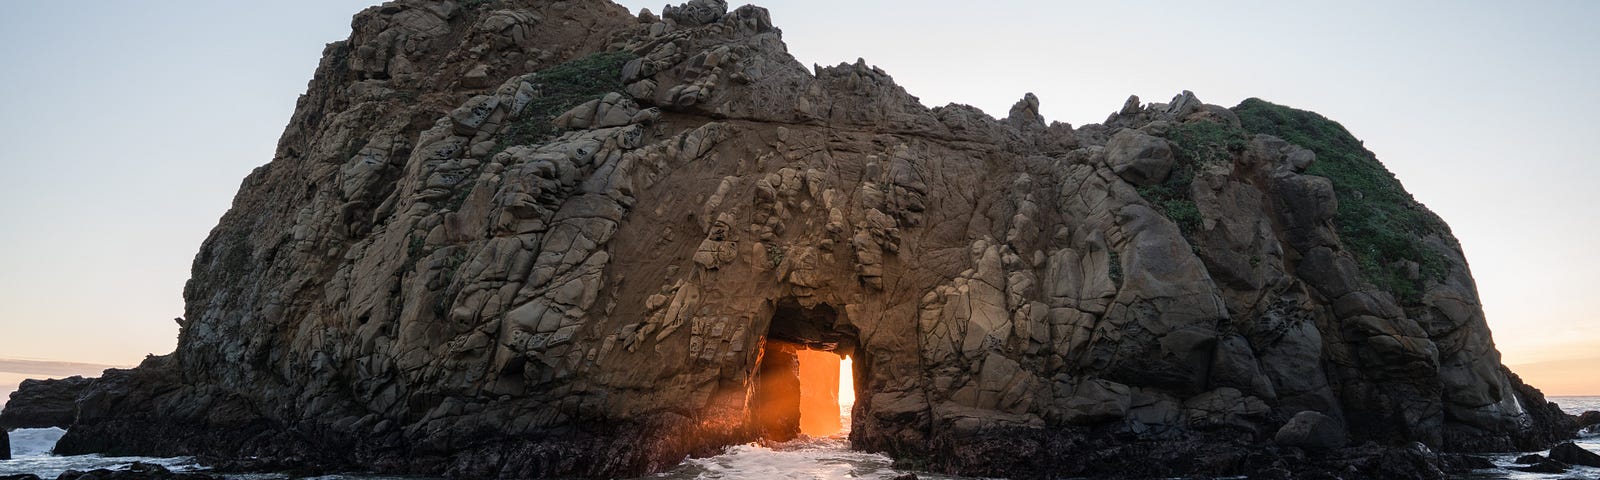 In the sea, the pierced rock lets the rising sun pass through